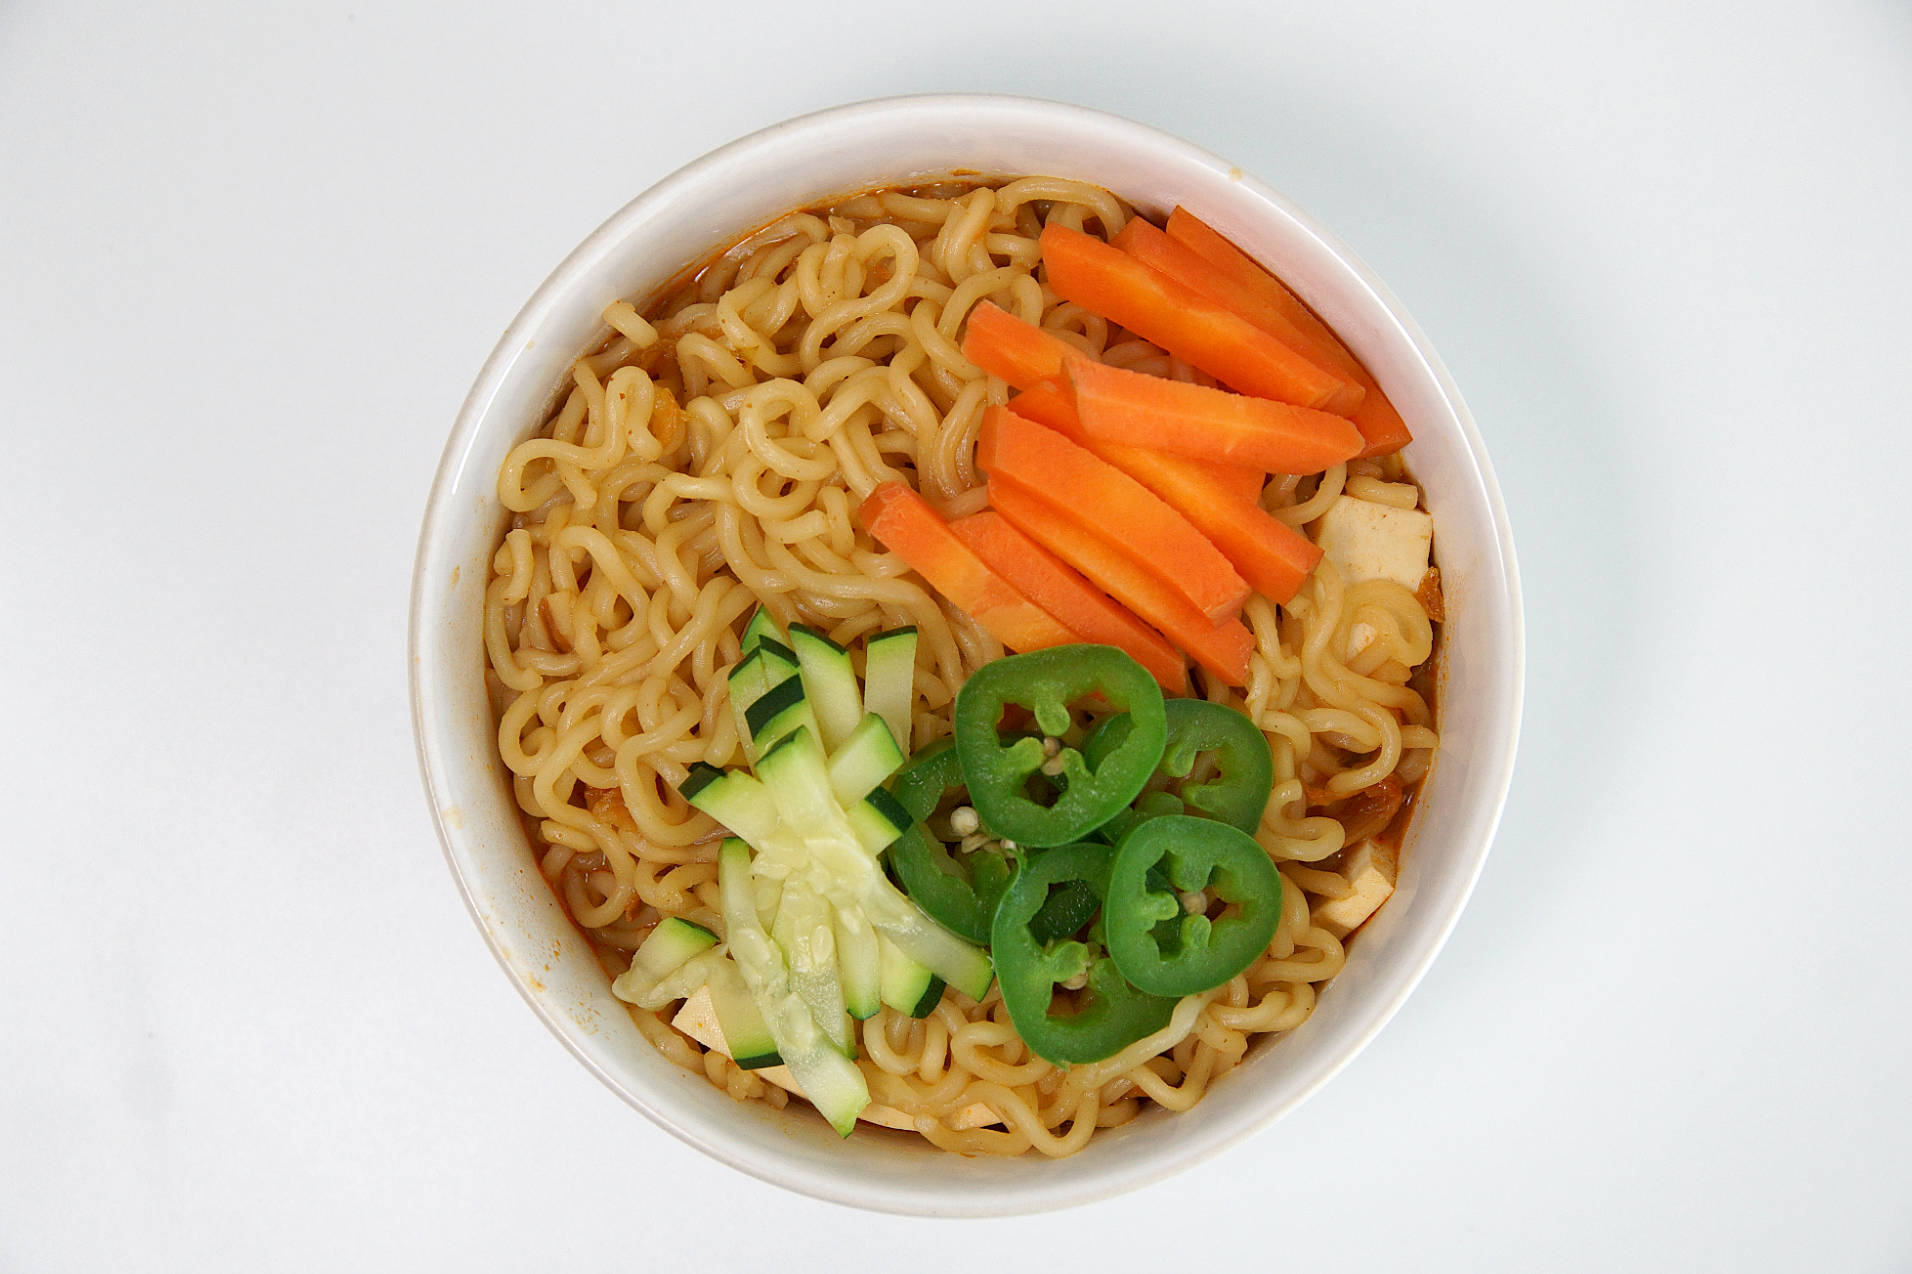 Kimchi Noodle Soup with additional vegetables